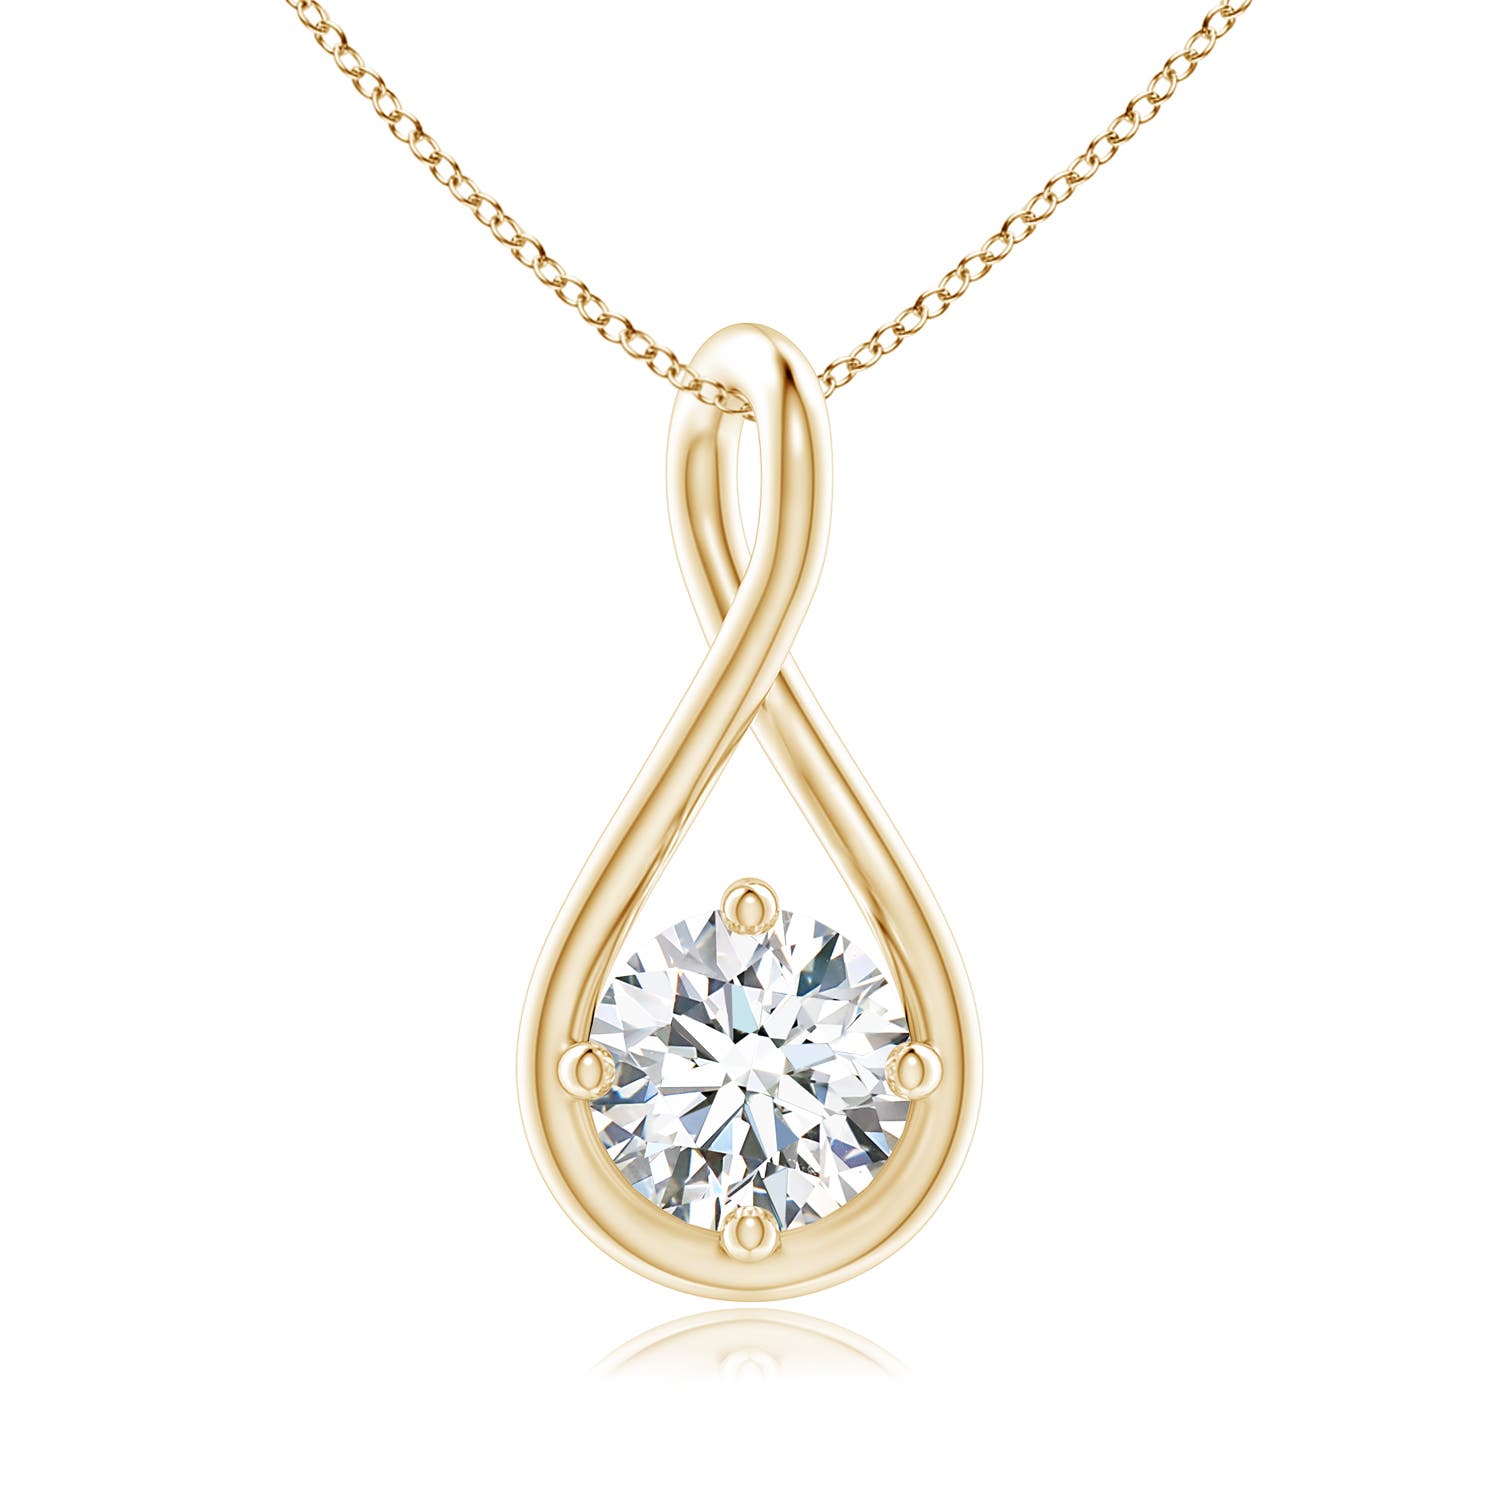 GVS2 / 0.5 CT / 14 KT Yellow Gold